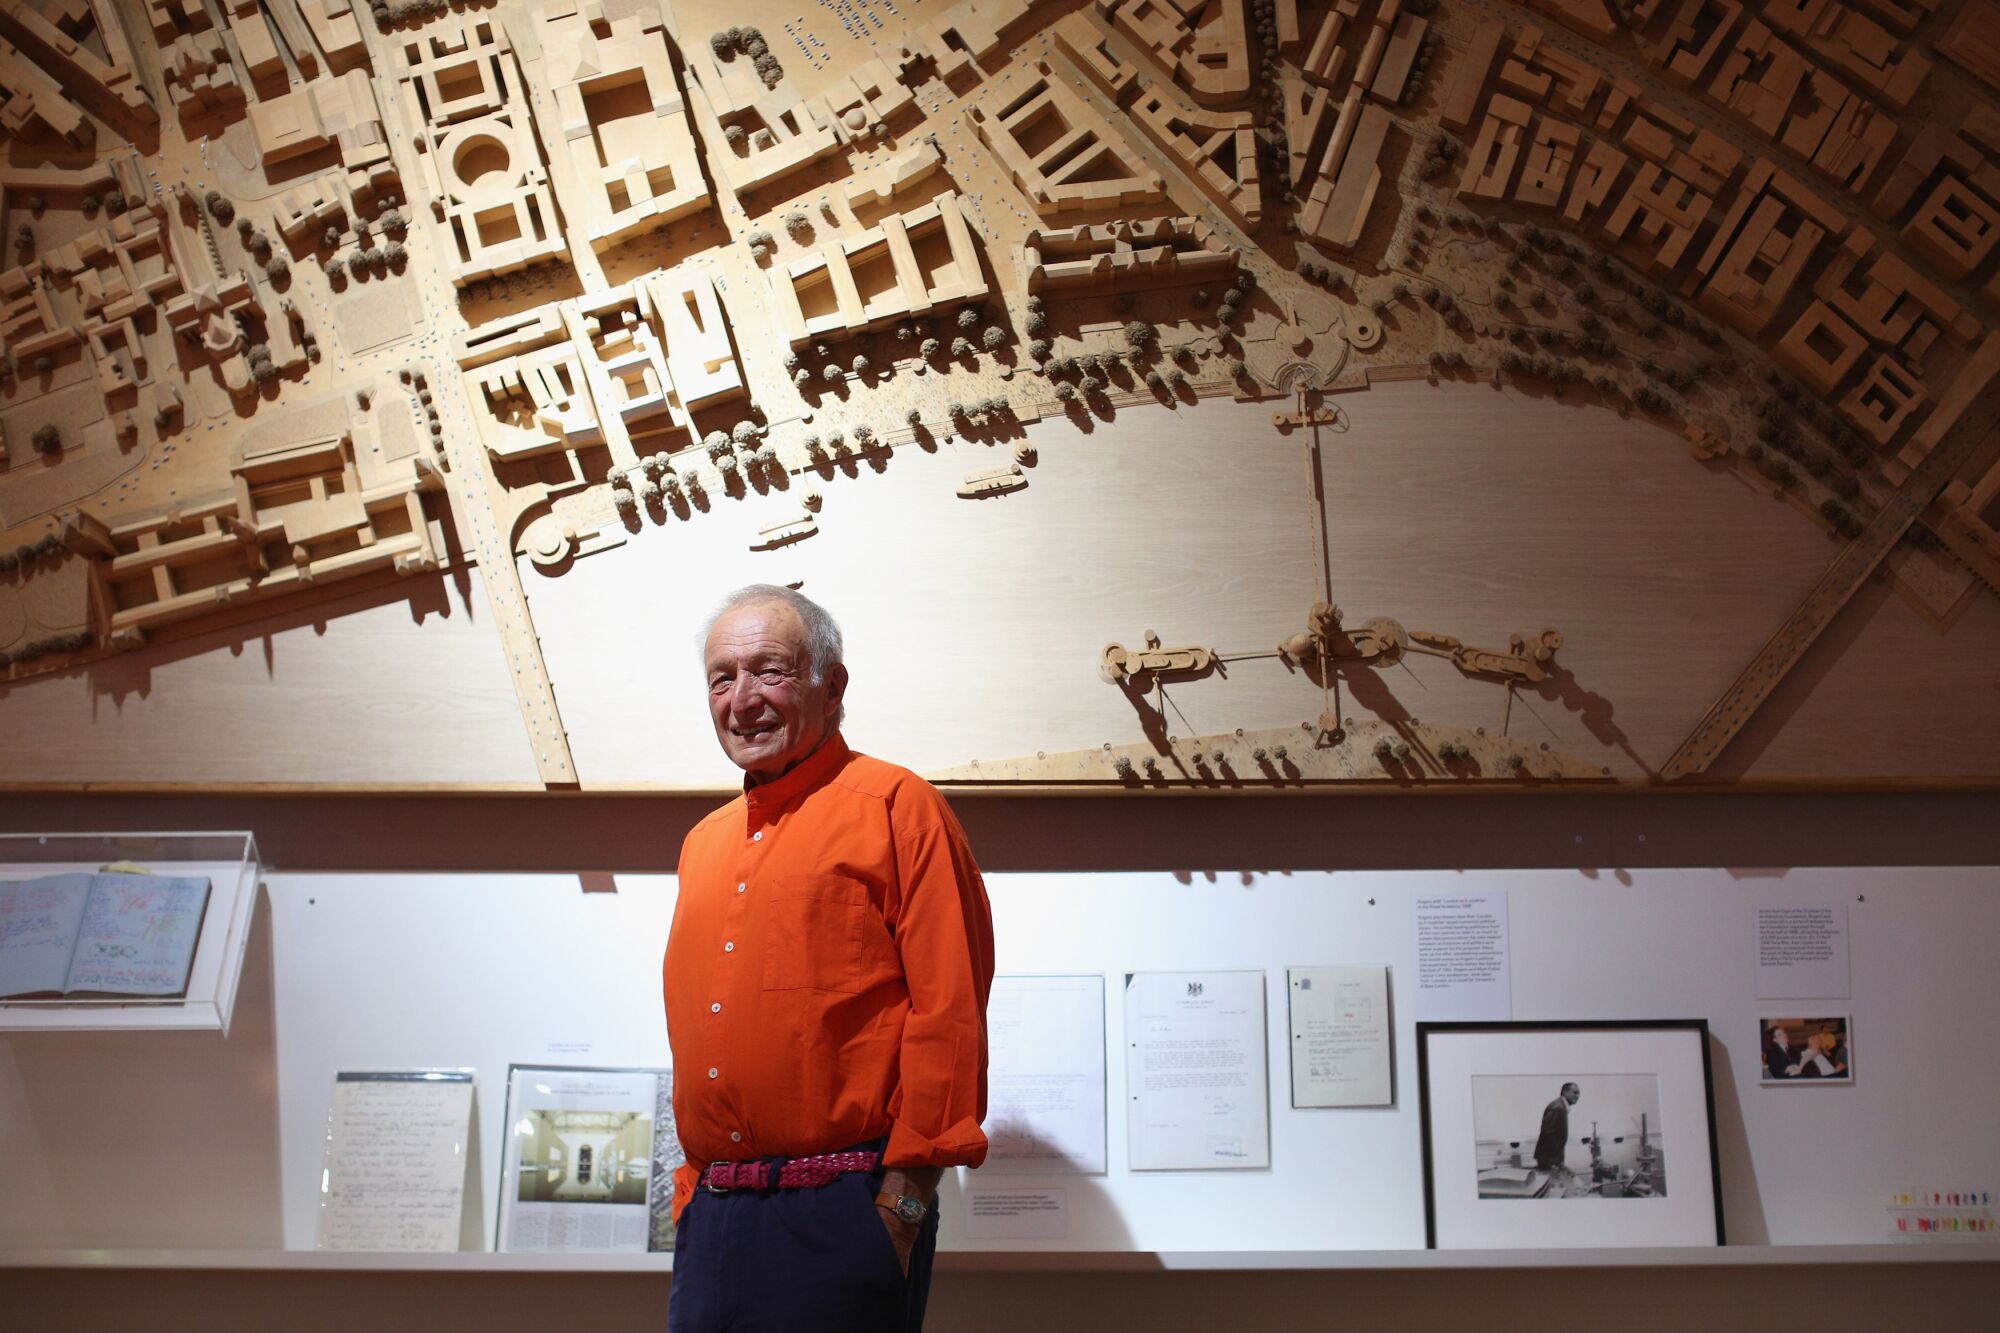 Richard Rogers, wearing a bright orange shirt, stands before a wooden model of a city suspended against a wall